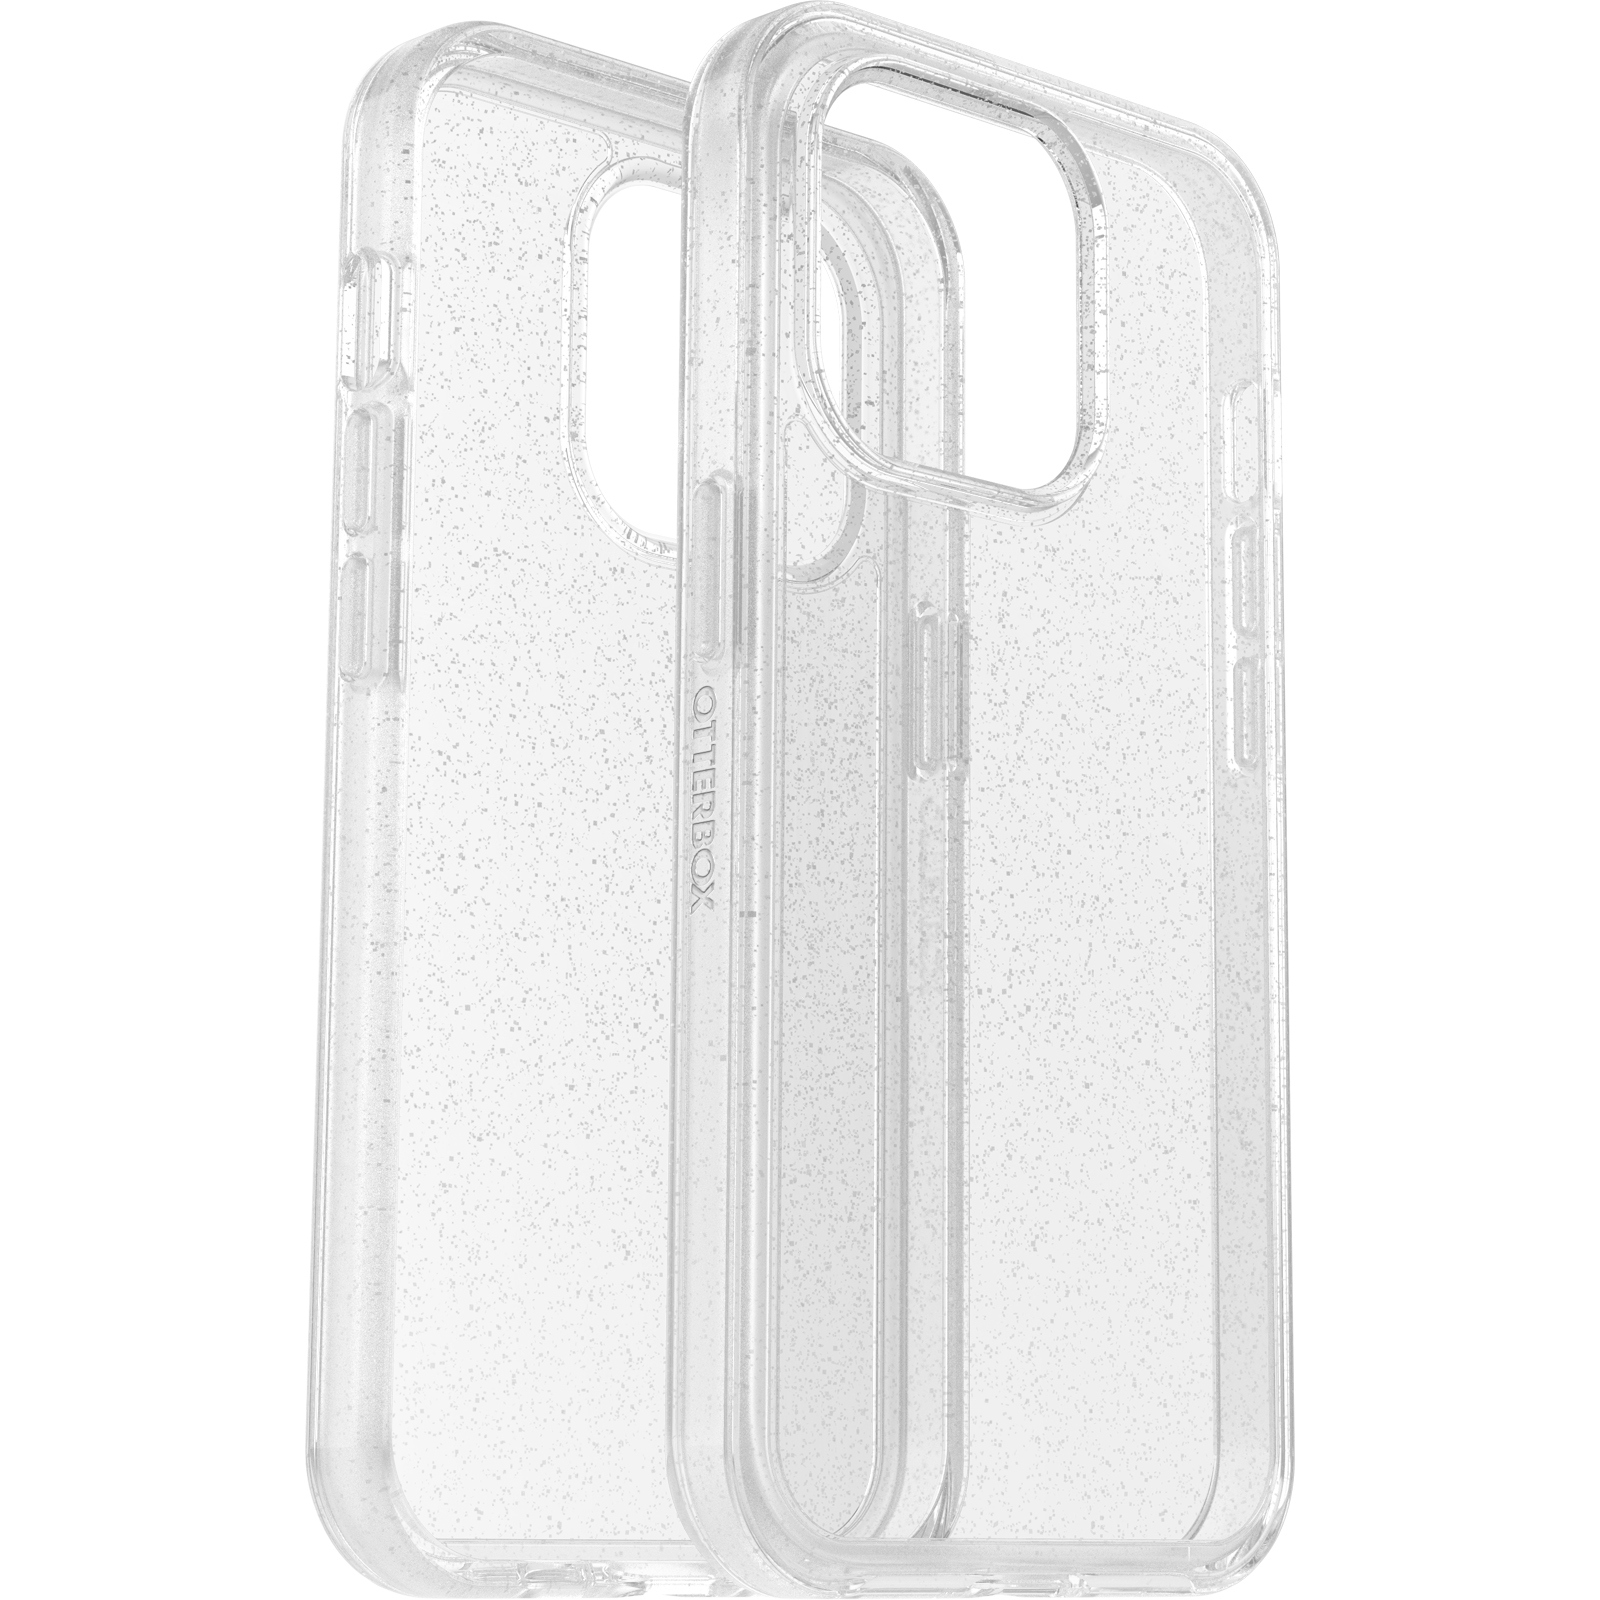 PRO, OTTERBOX Backcover, 14 APPLE, IPHONE CLEAR Symmetry,